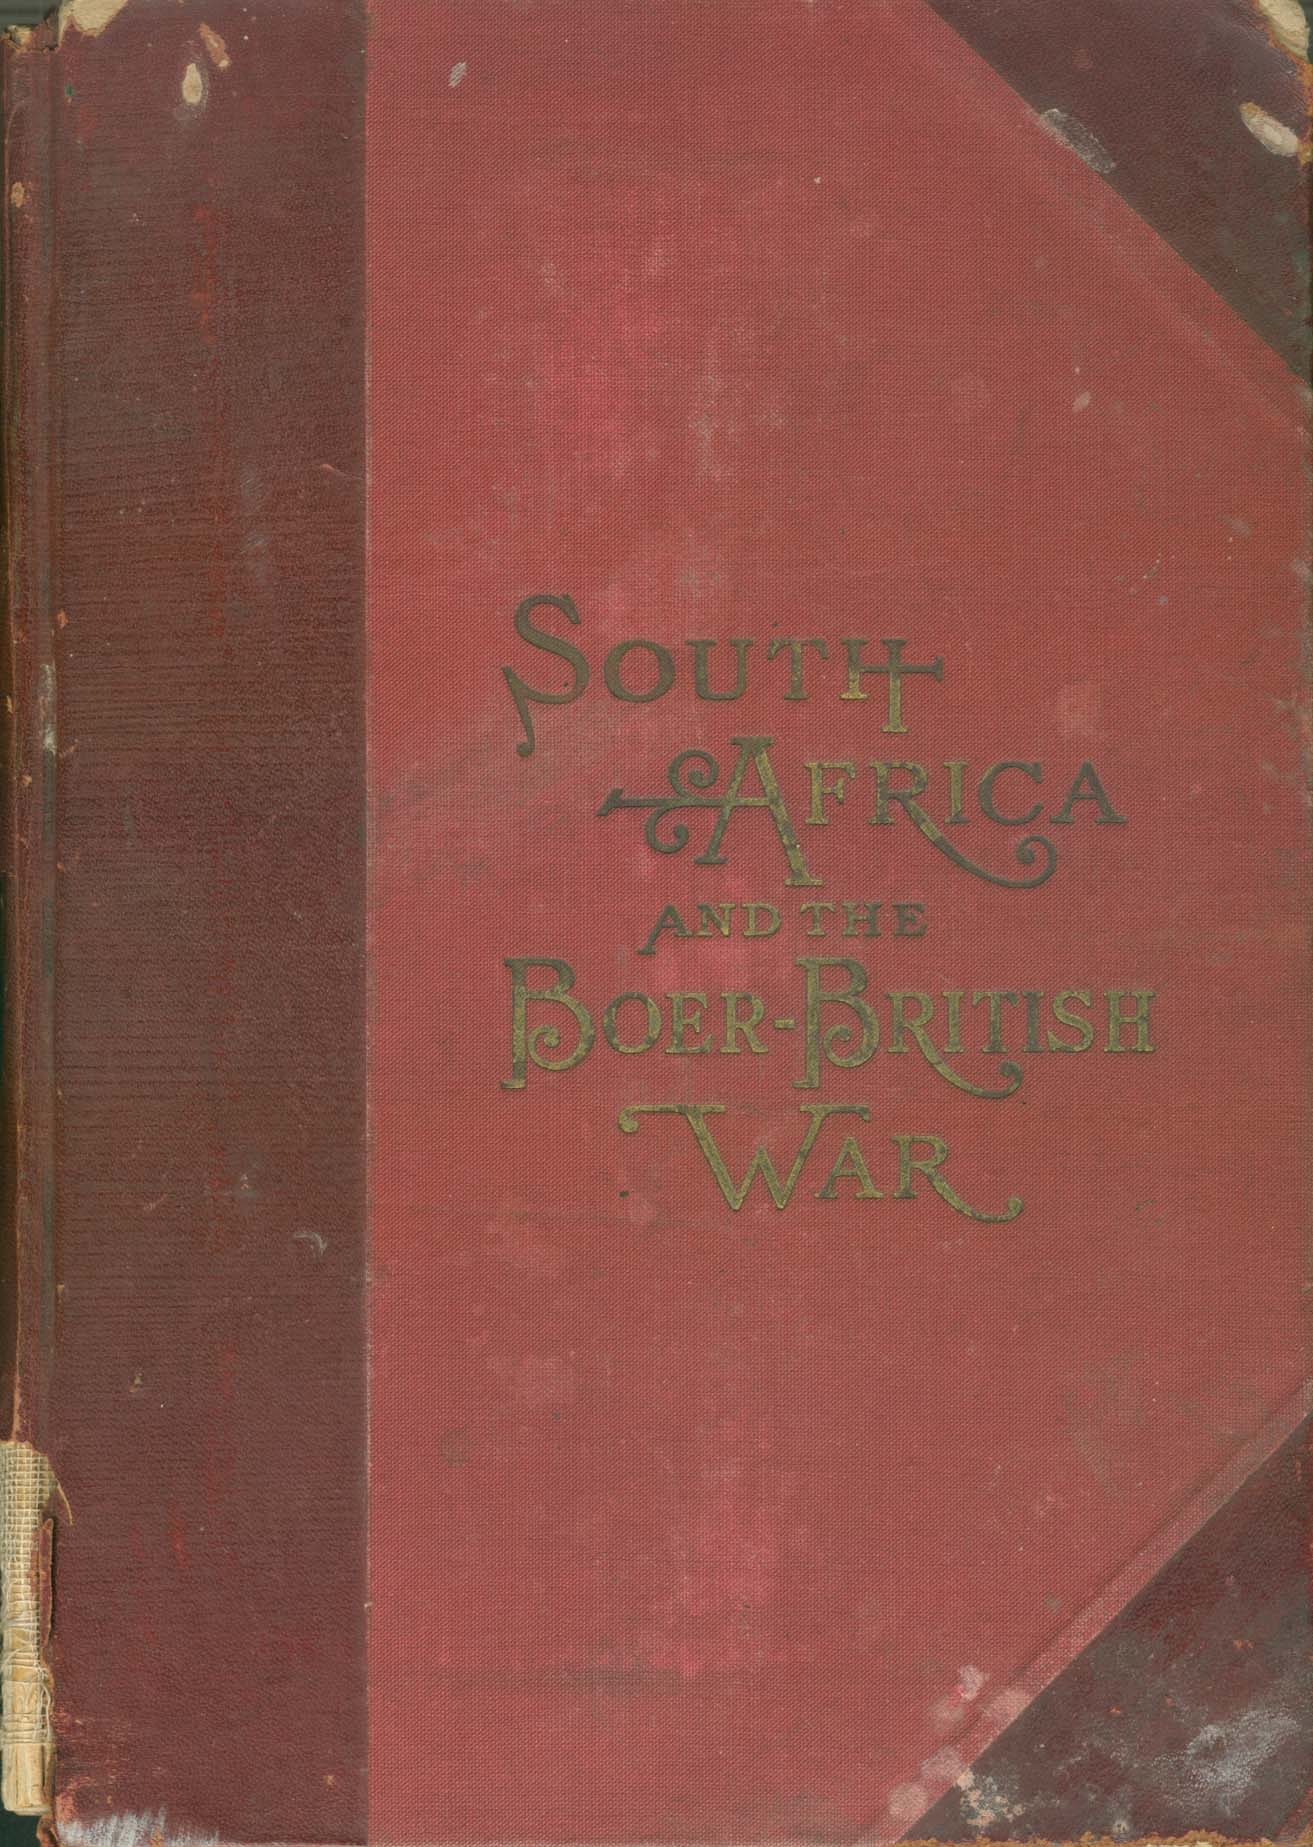 Red book-cover Displays the title Sout Africa and the Boer-British War